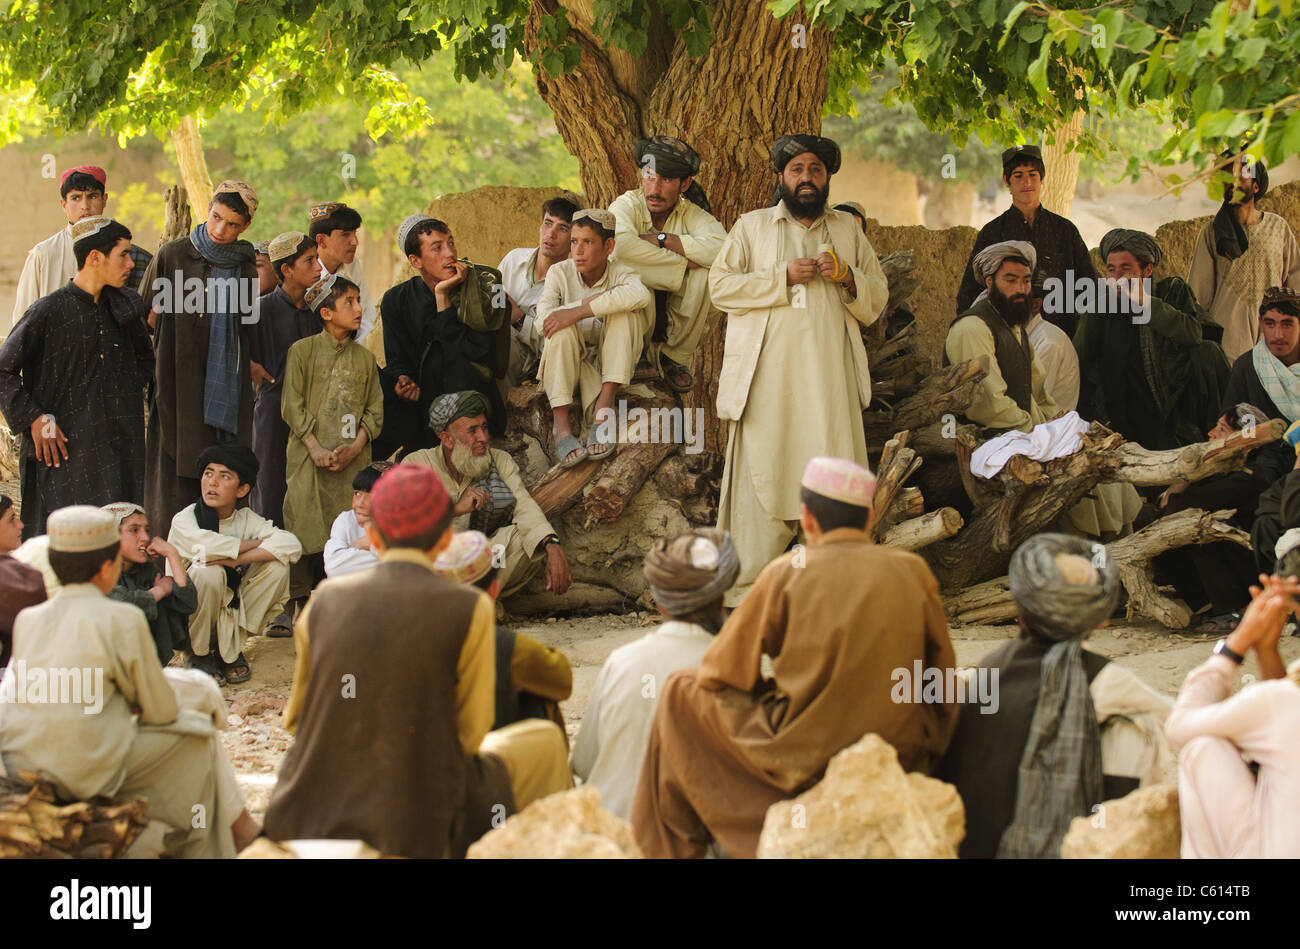 District chief Abdul Qayum center speaks to Afghan elders during a shura in Zabul province Afghanistan. Qayum discussed security in the district and the upcoming parliamentary elections. Sept. 8 2010., Photo by:Everett Collection(BSLOC 2011 6 99) Stock Photo